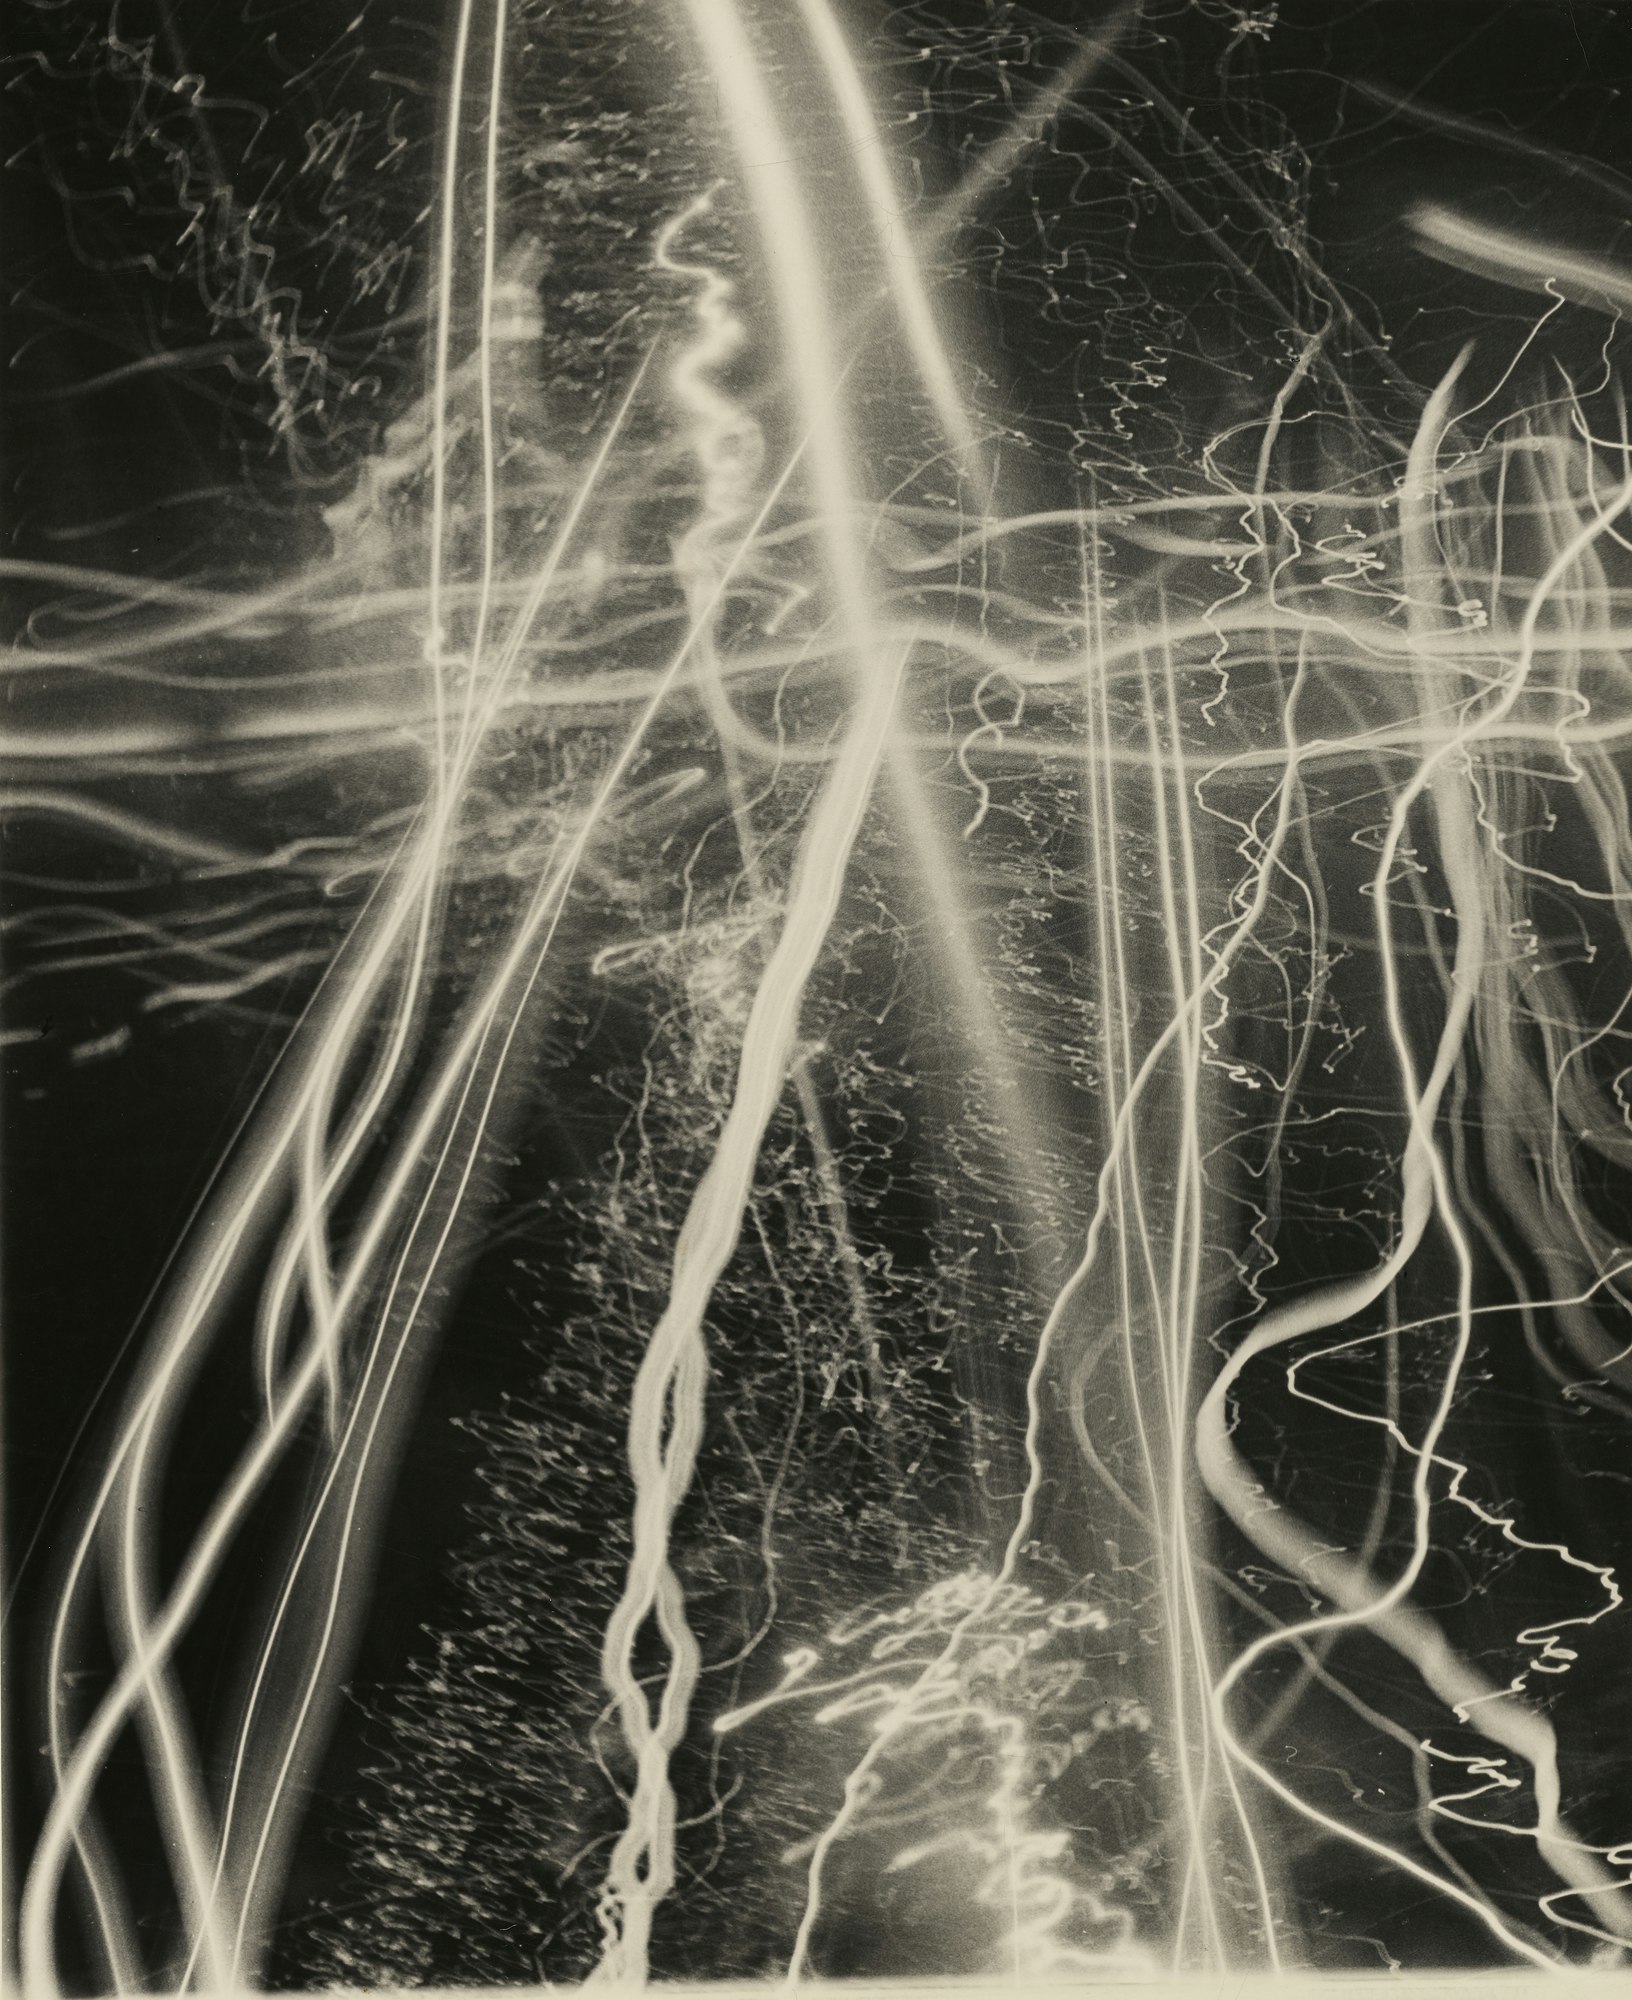 Car Light Study #7, 1939, Nathan Lerner. Getty Museum. Purchased in part with funds provided by an anonymous donor in memory of James N. Wood. ©Estate of Nathan Lerner.